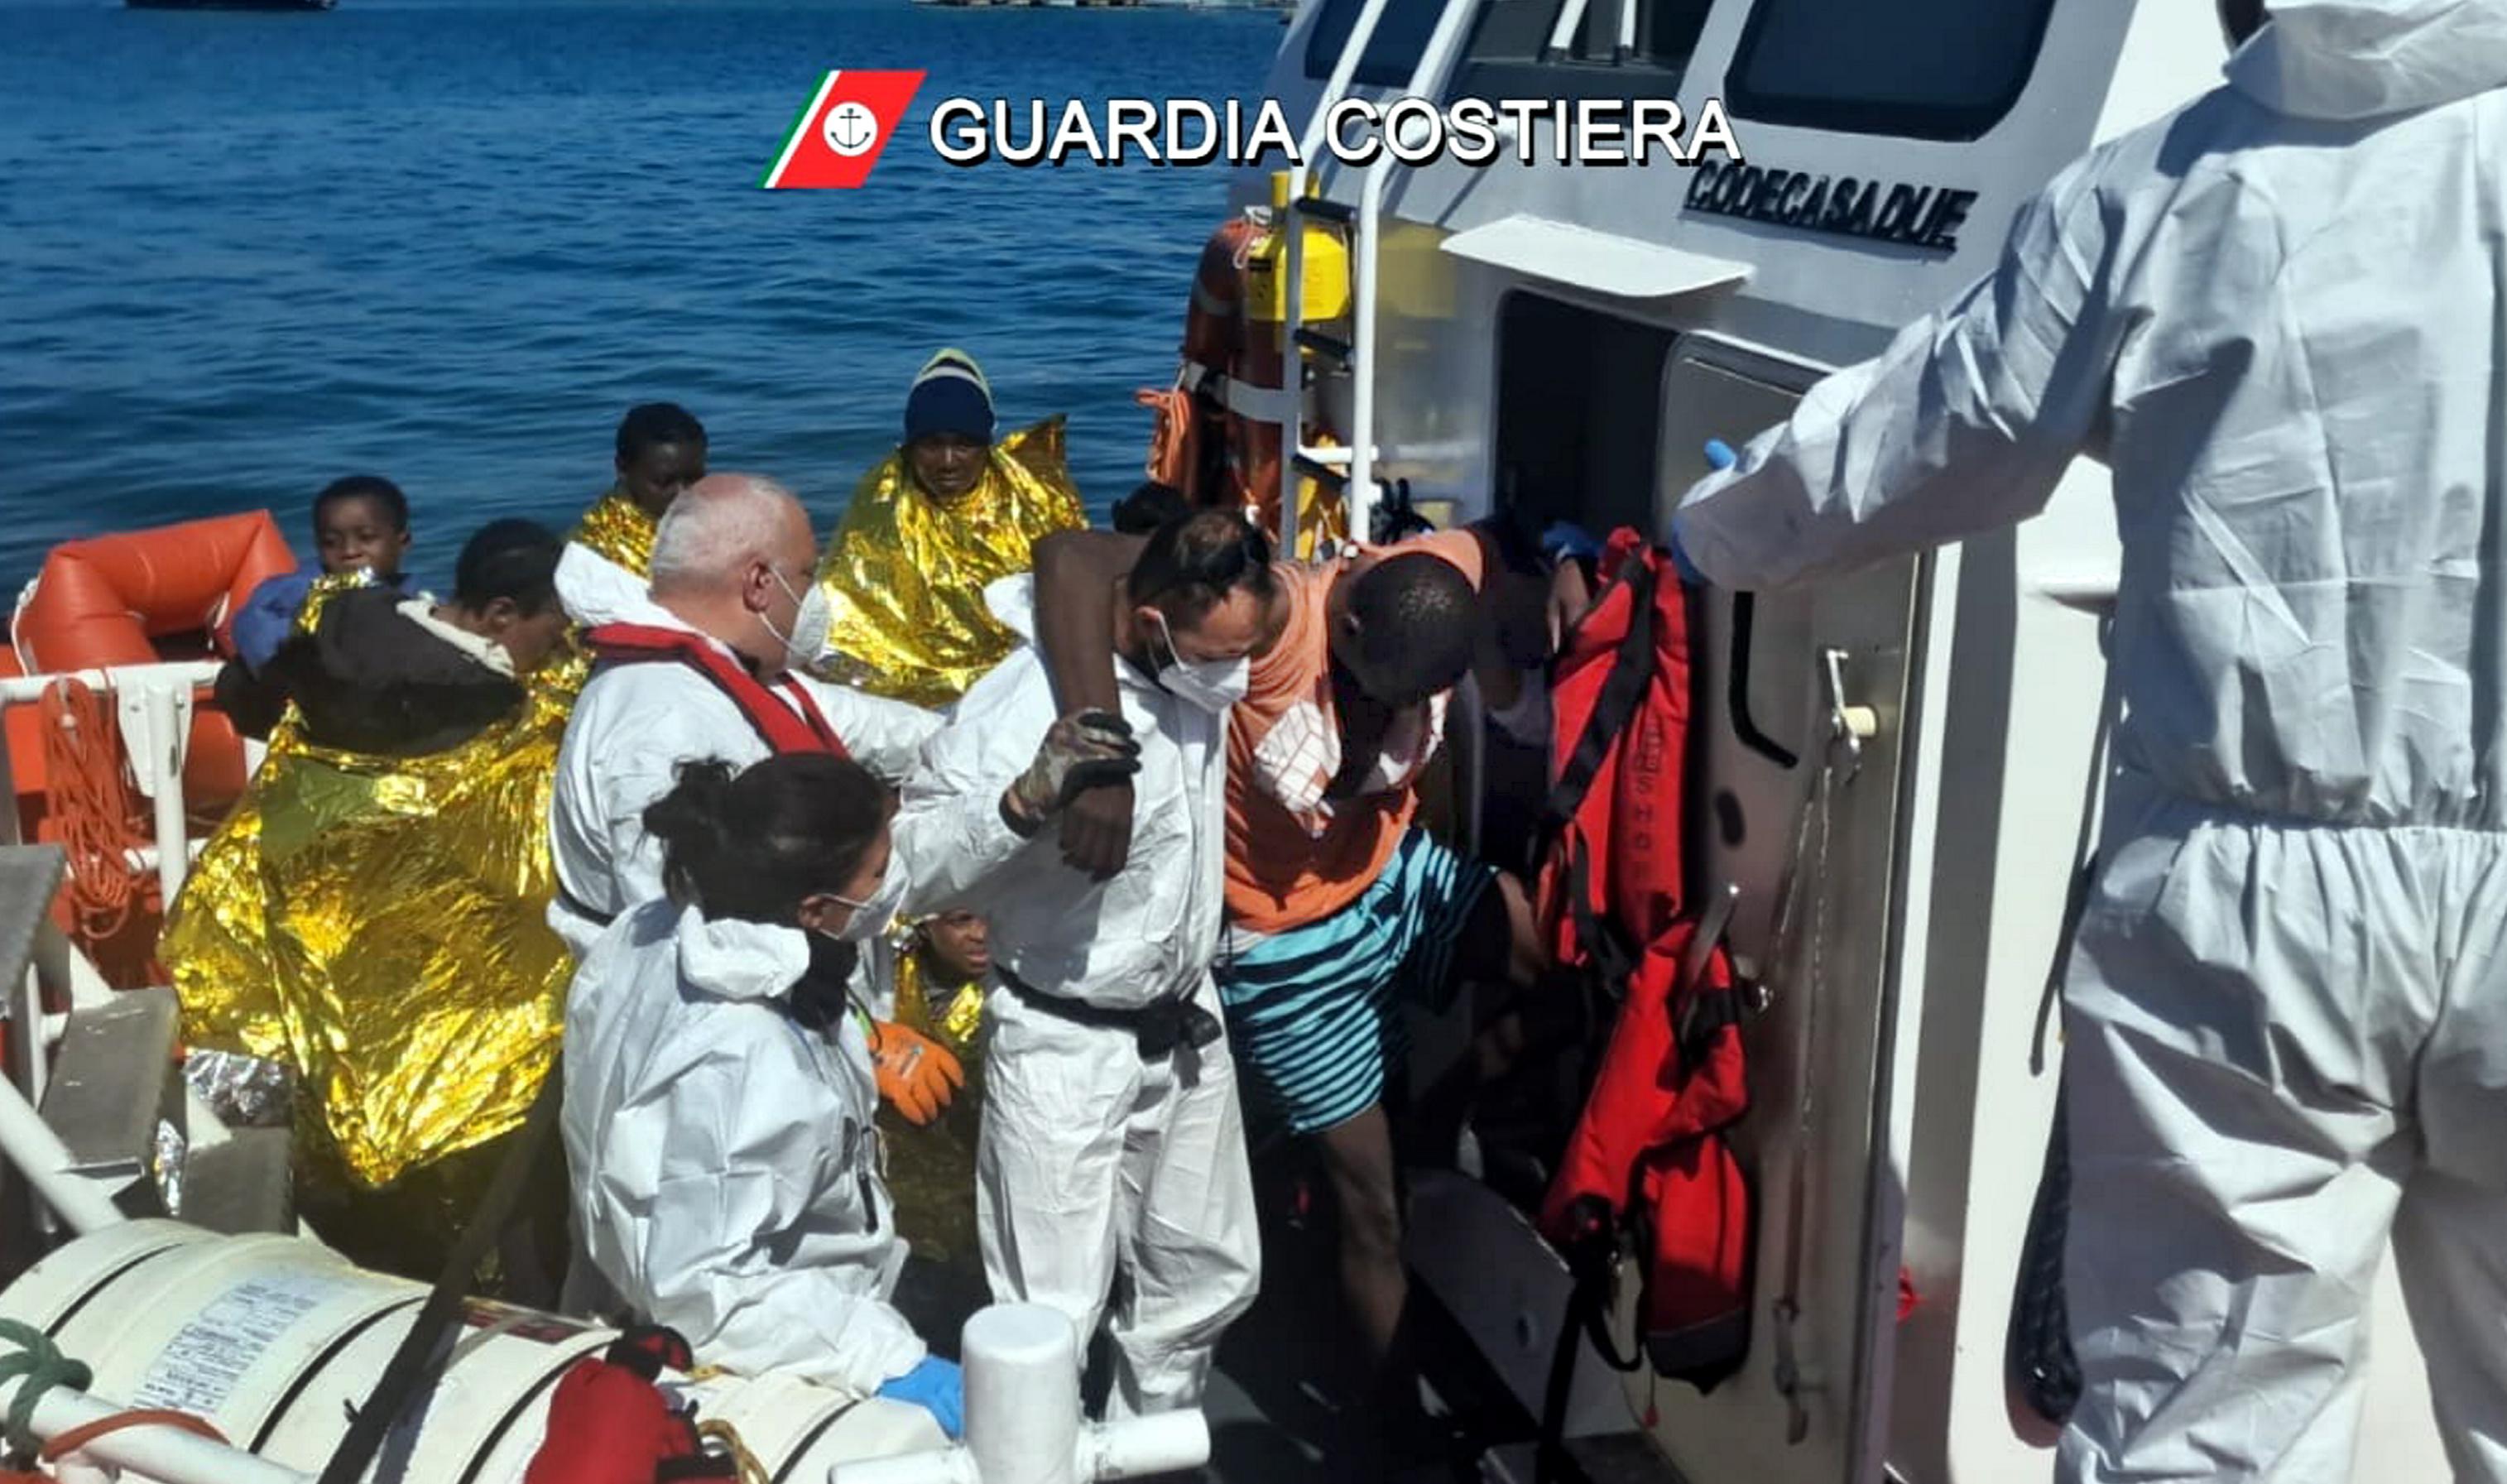 Migrants, Lampedusa under siege: more than 3,300 arrived in less than 72 hours